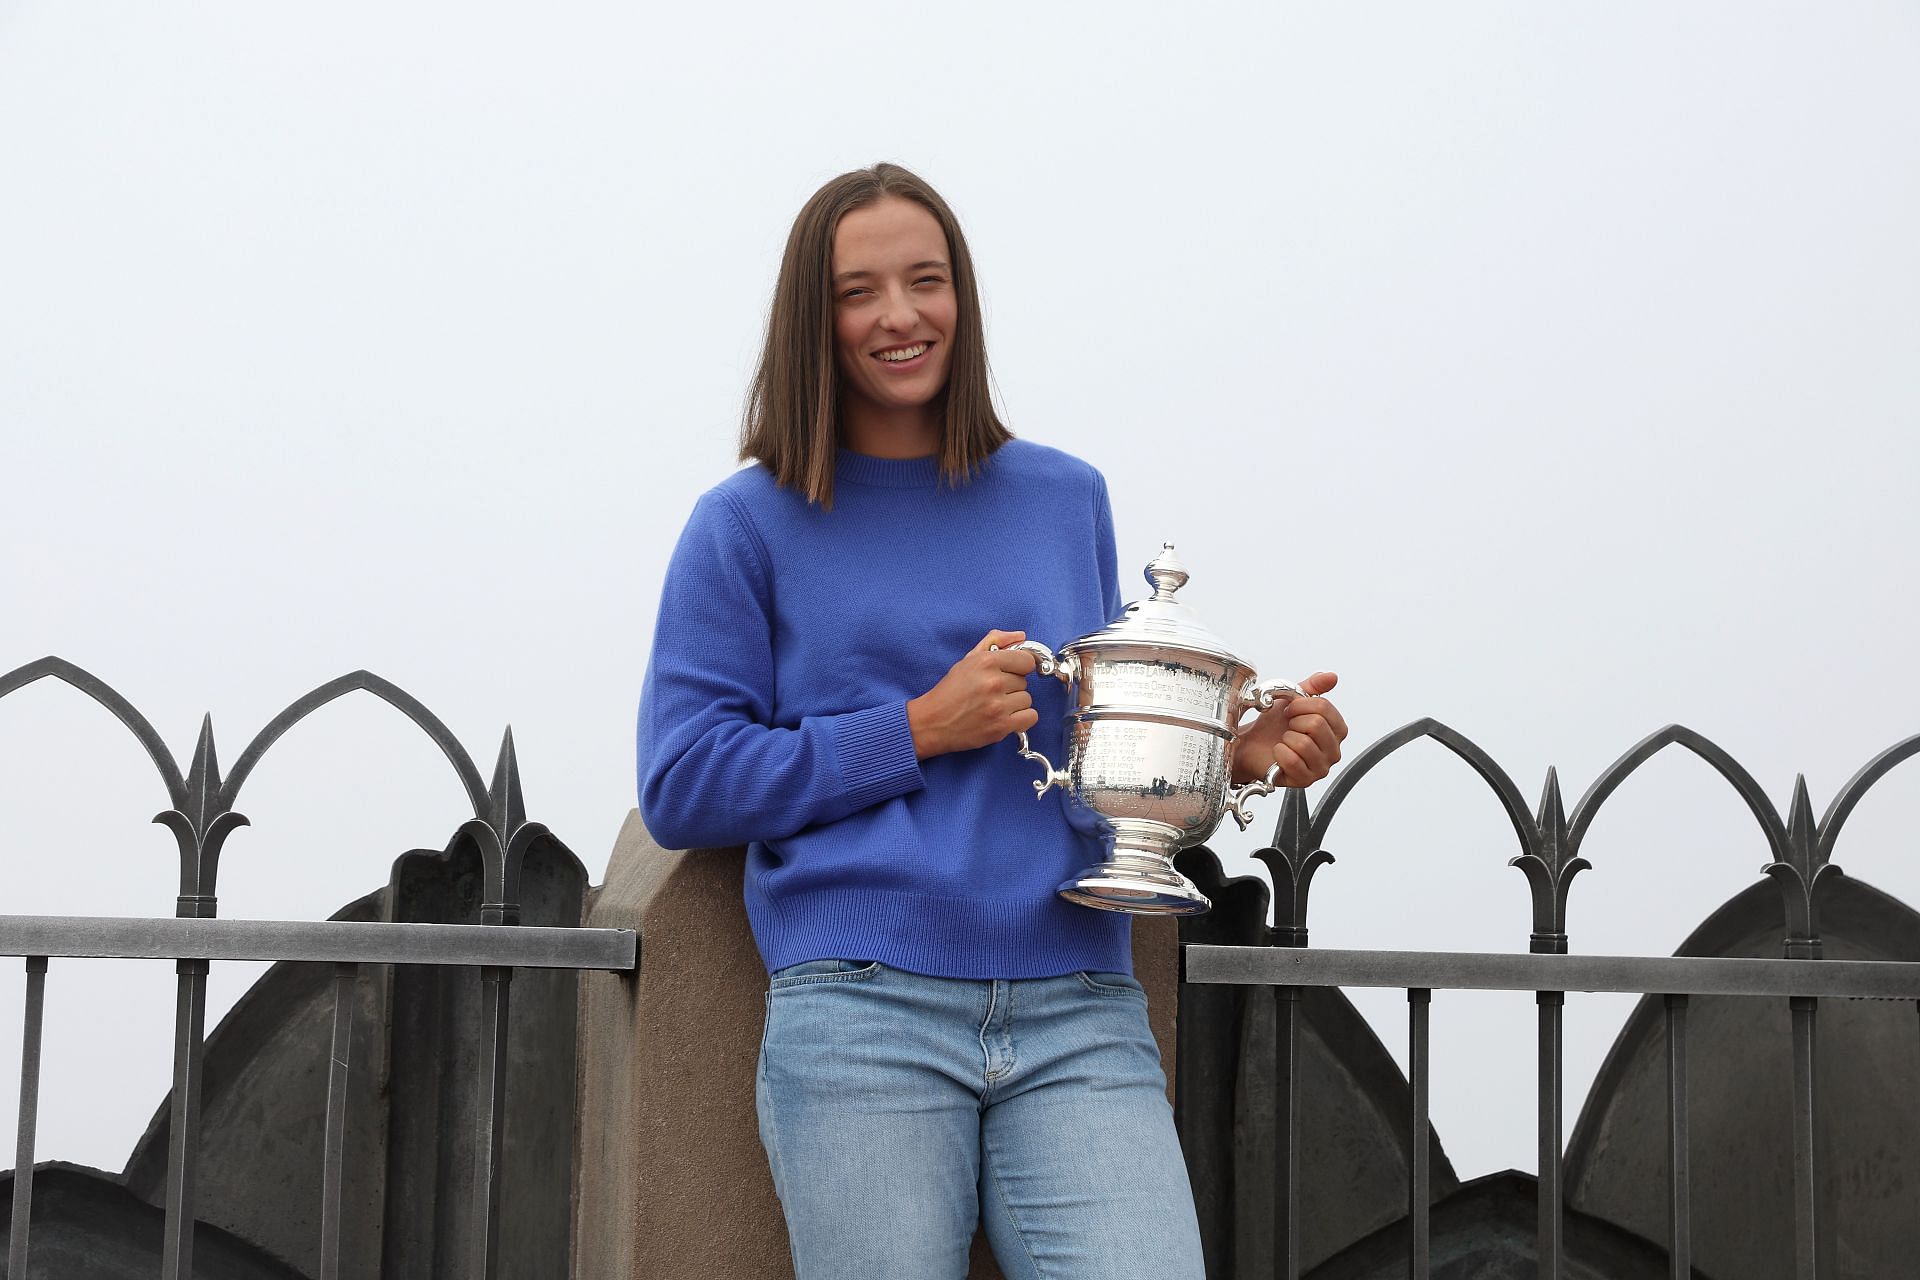 Iga Swiatek poses with US Open 2022 trophy. Photo by Julian Finney/Getty Images